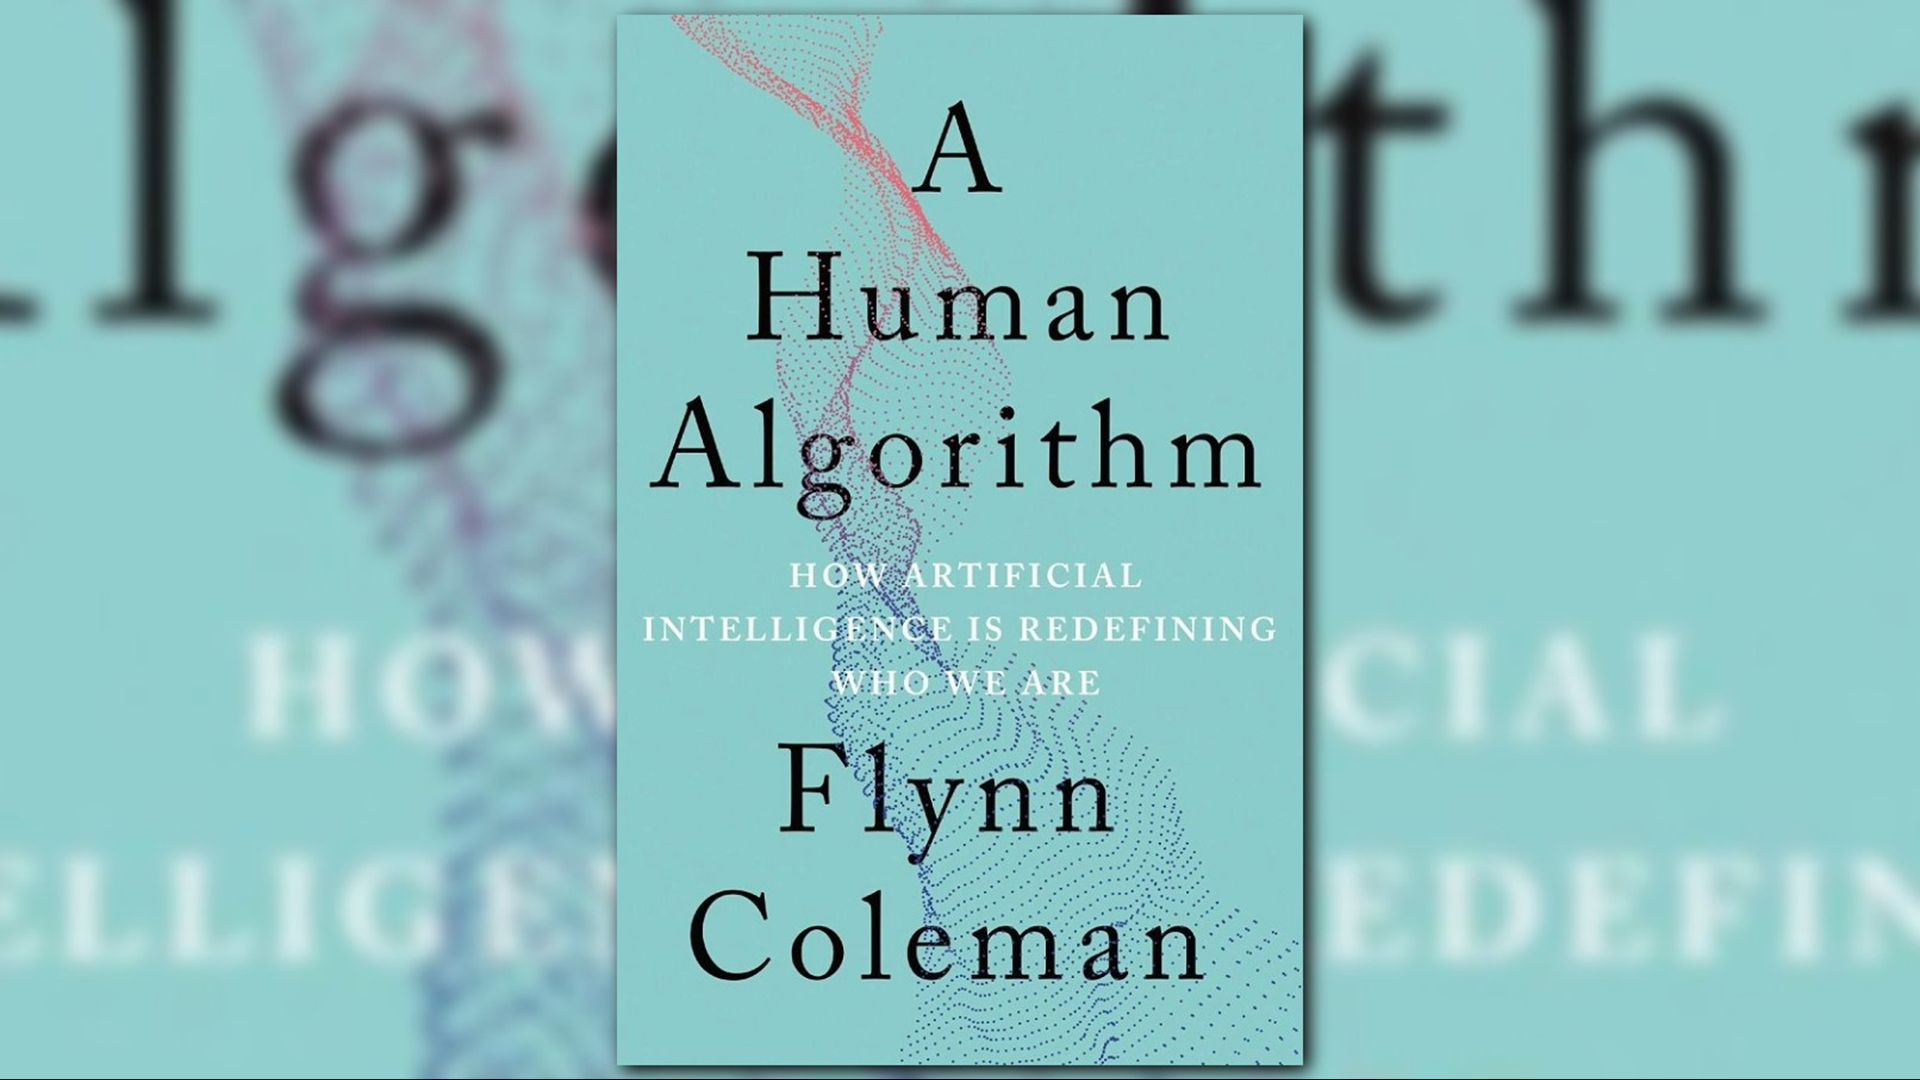 A new book urges us to consider ethically designed artificial intelligence before it's too late.